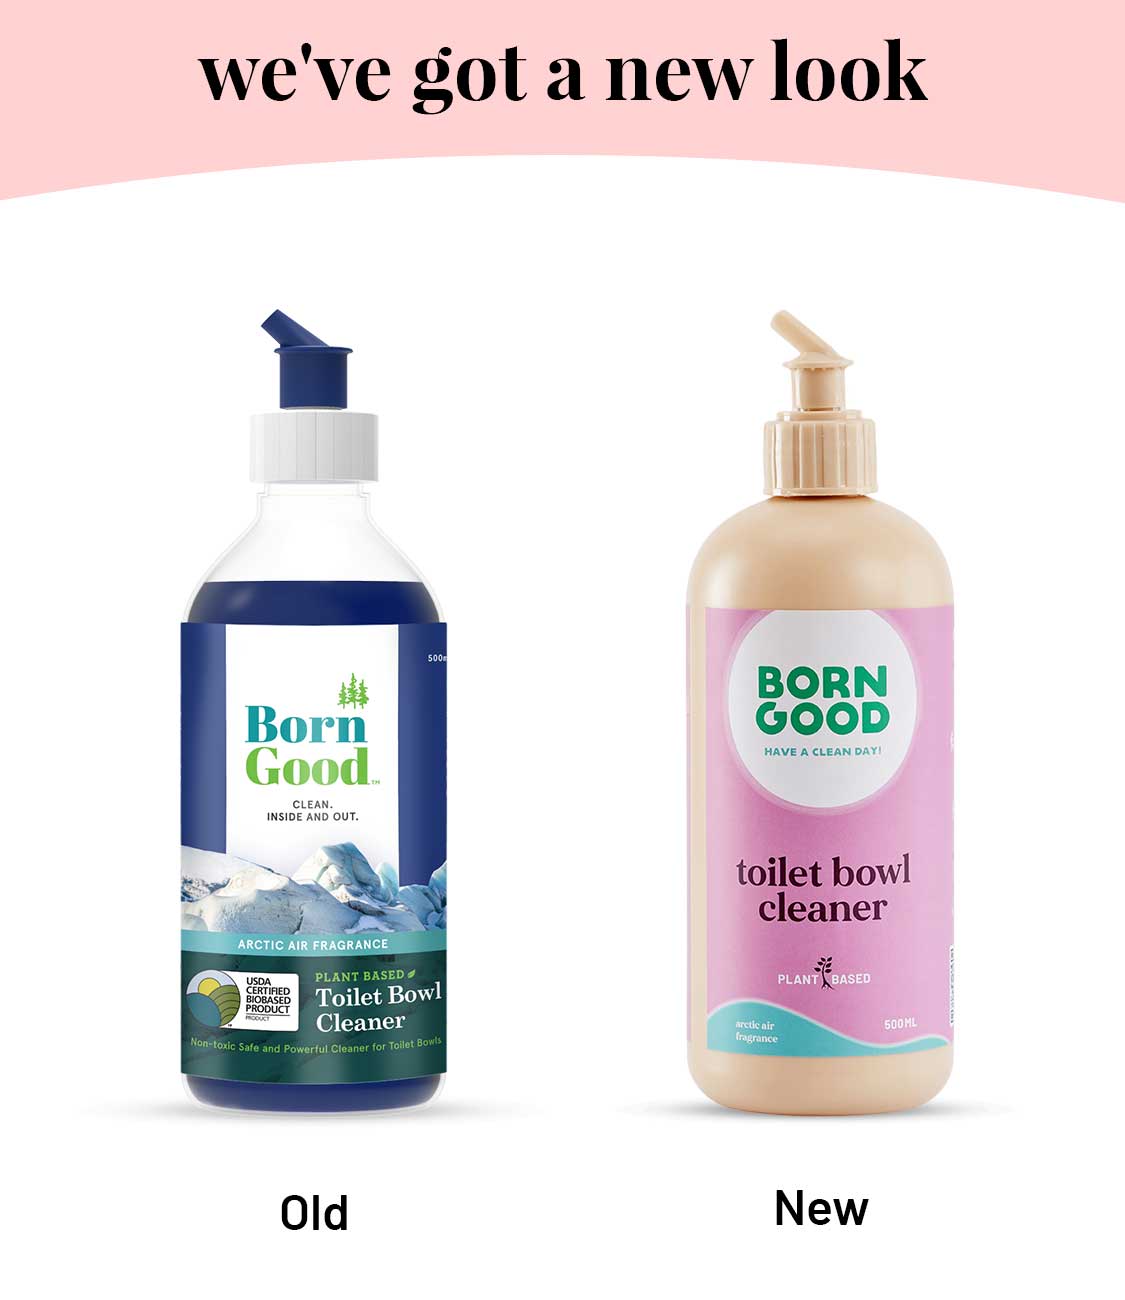 Born Good Plant-based Toilet Bowl Cleaner -  500ml Can